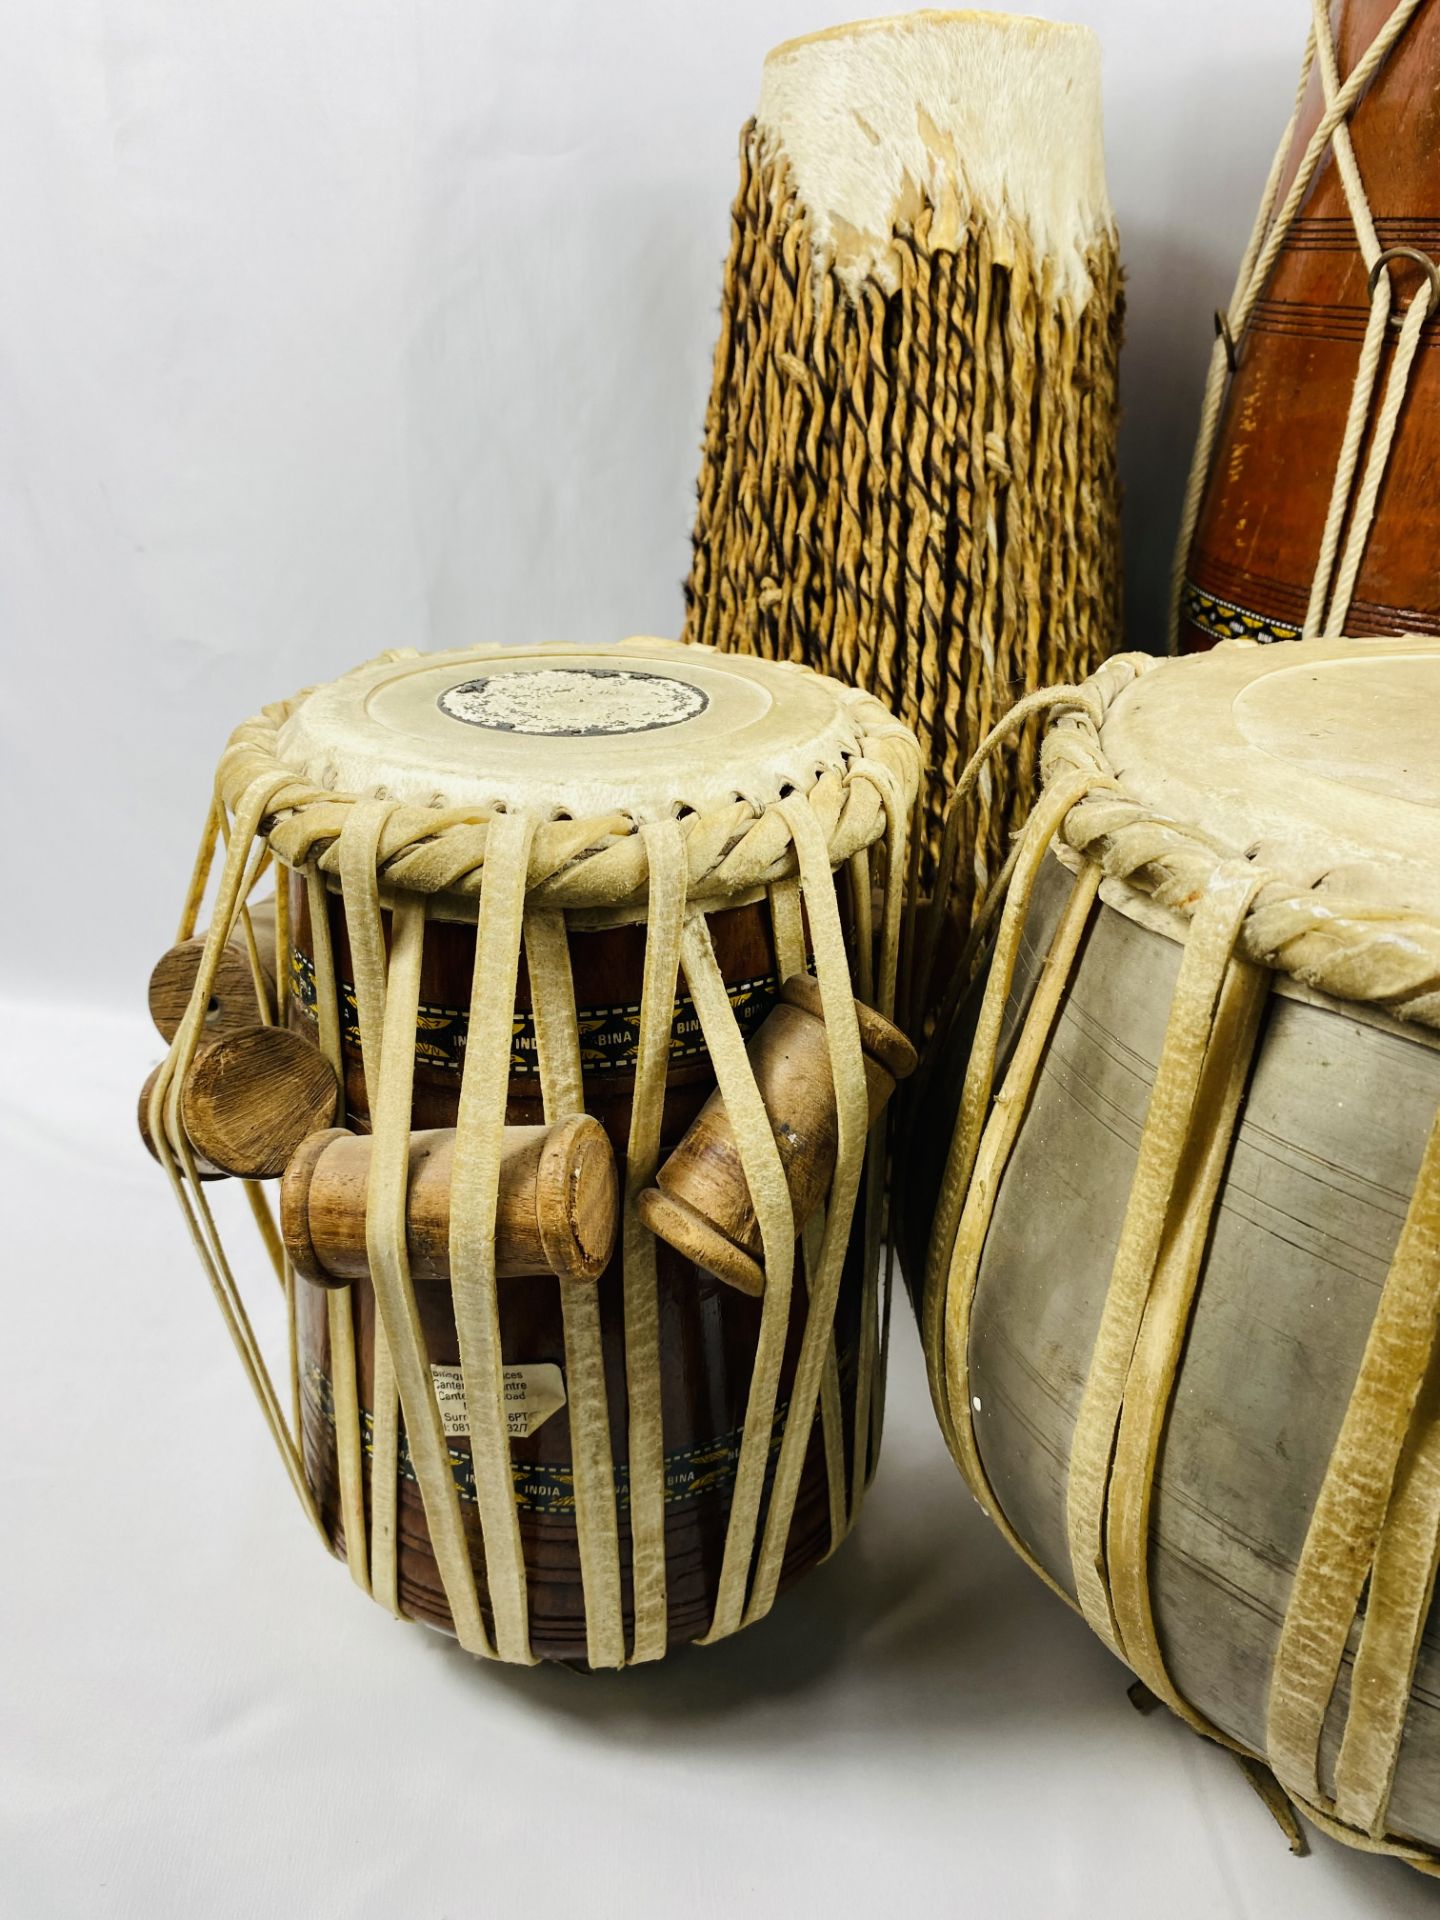 Four Indian drums - Image 2 of 4